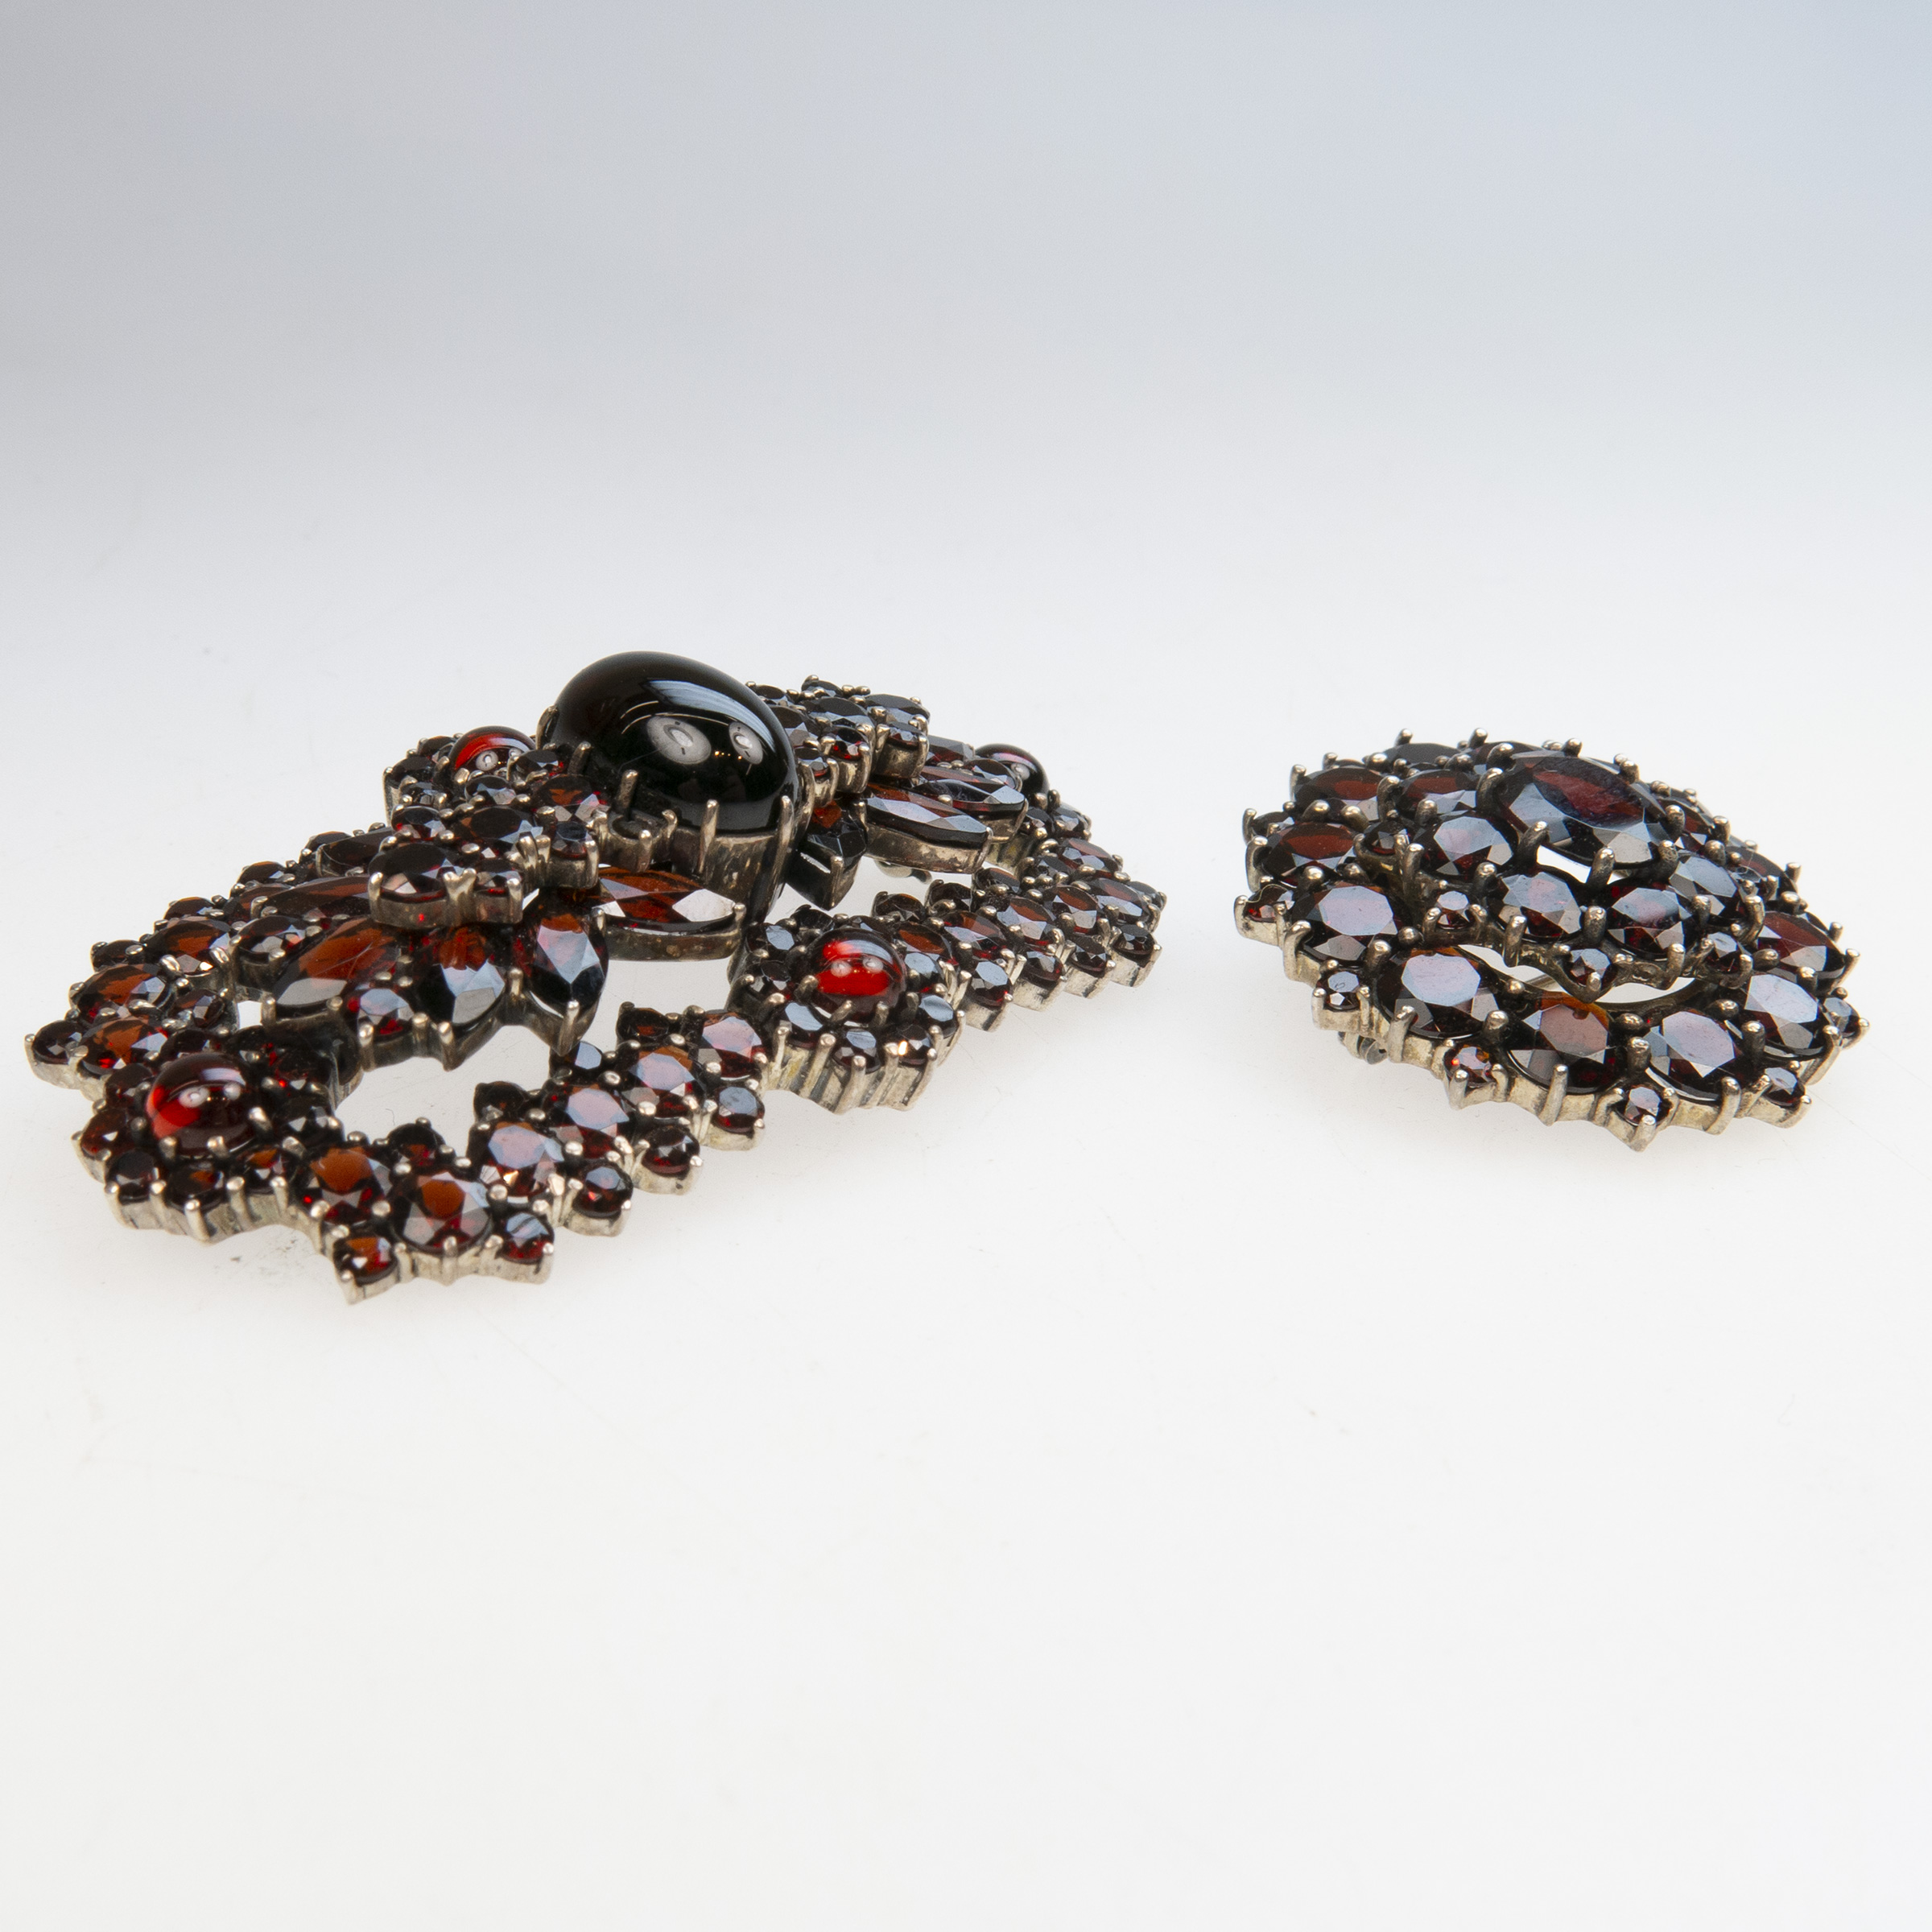 Two Czech Sterling Silver Brooches